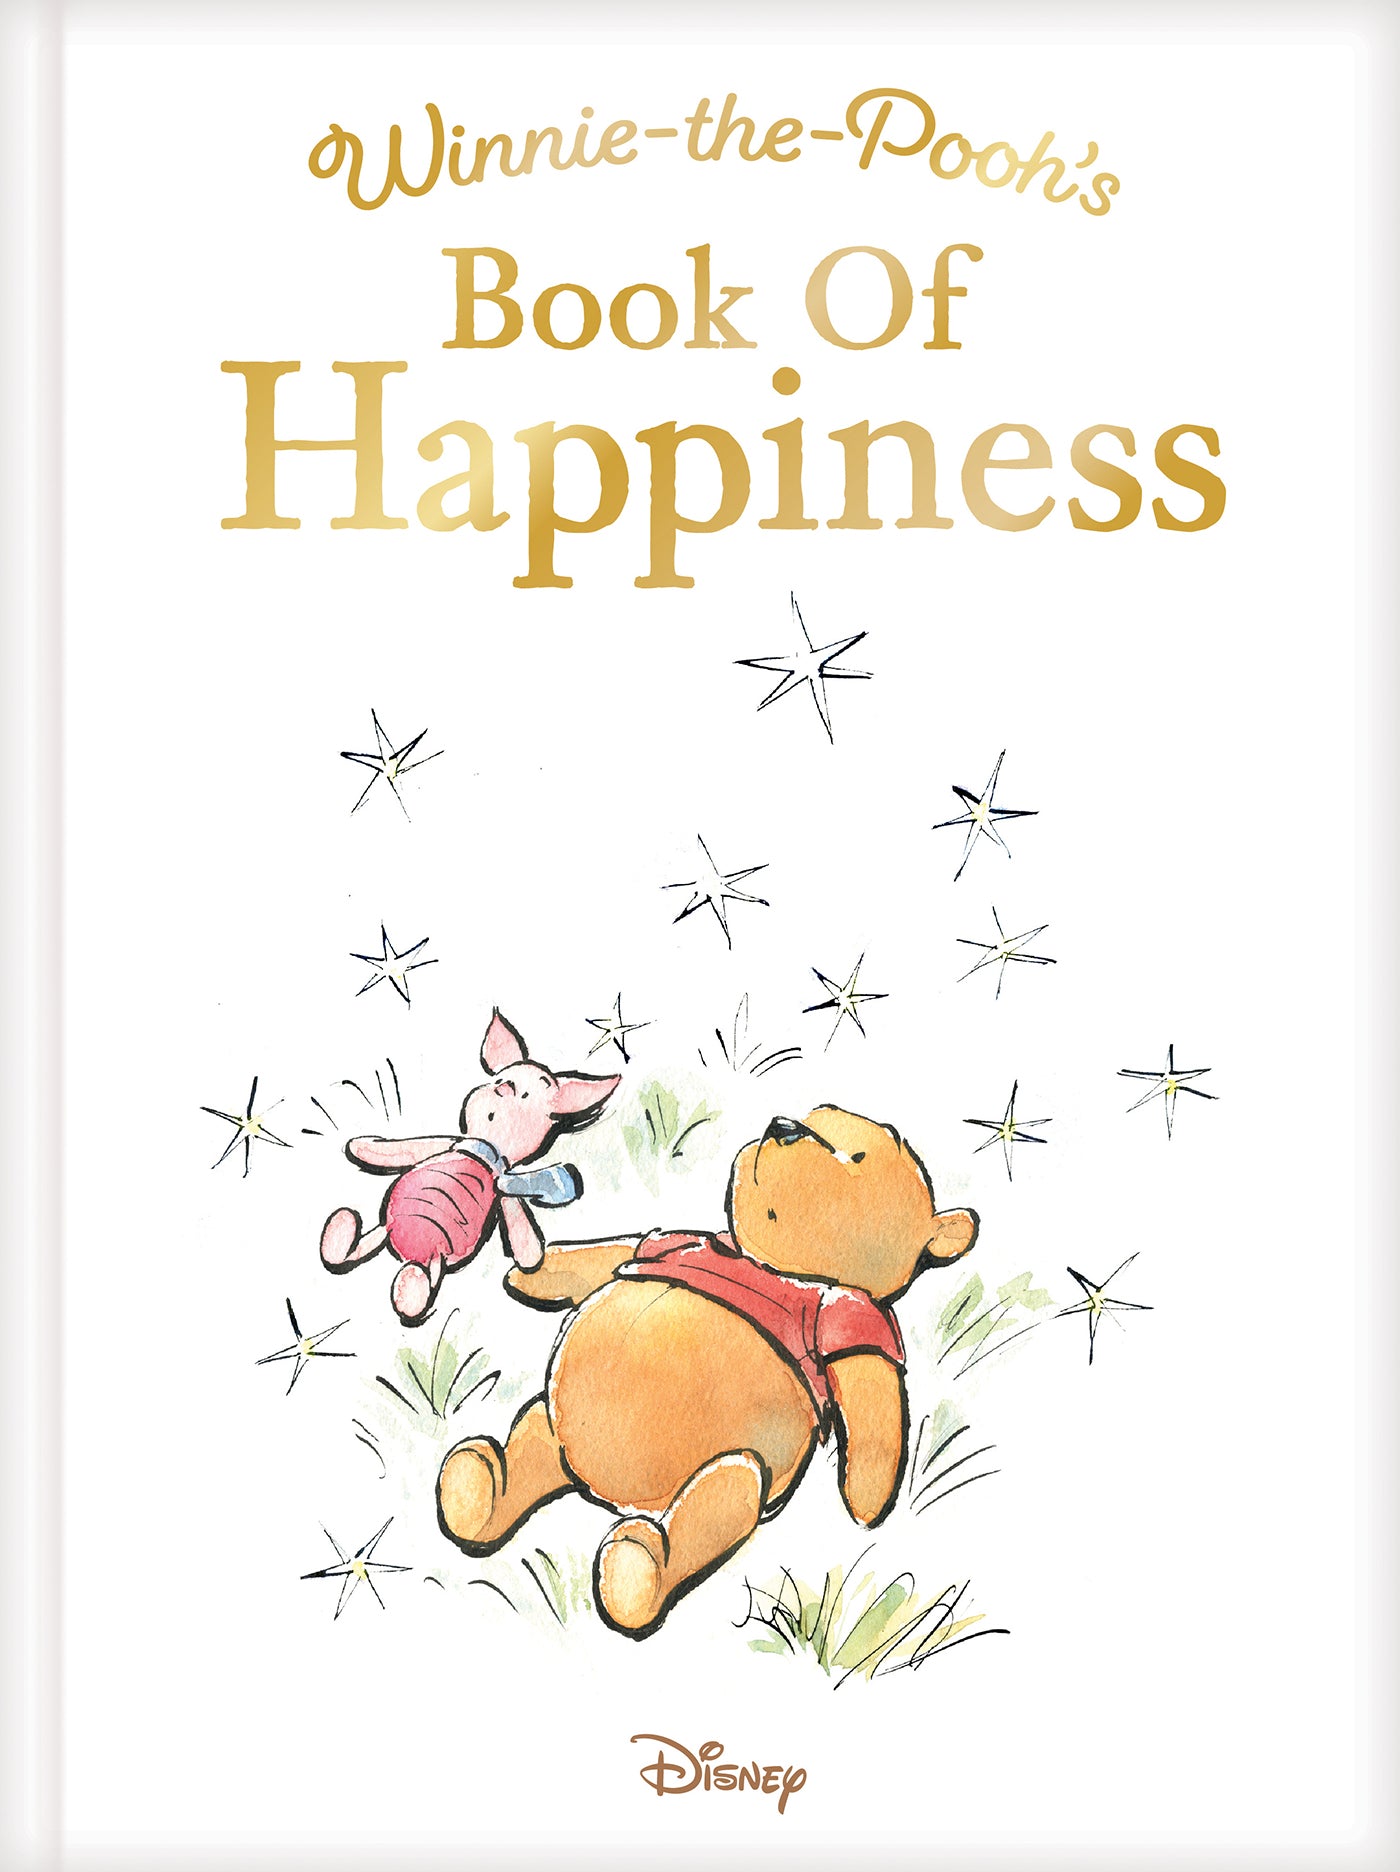 Winnie-the-Pooh’s Book of Happiness